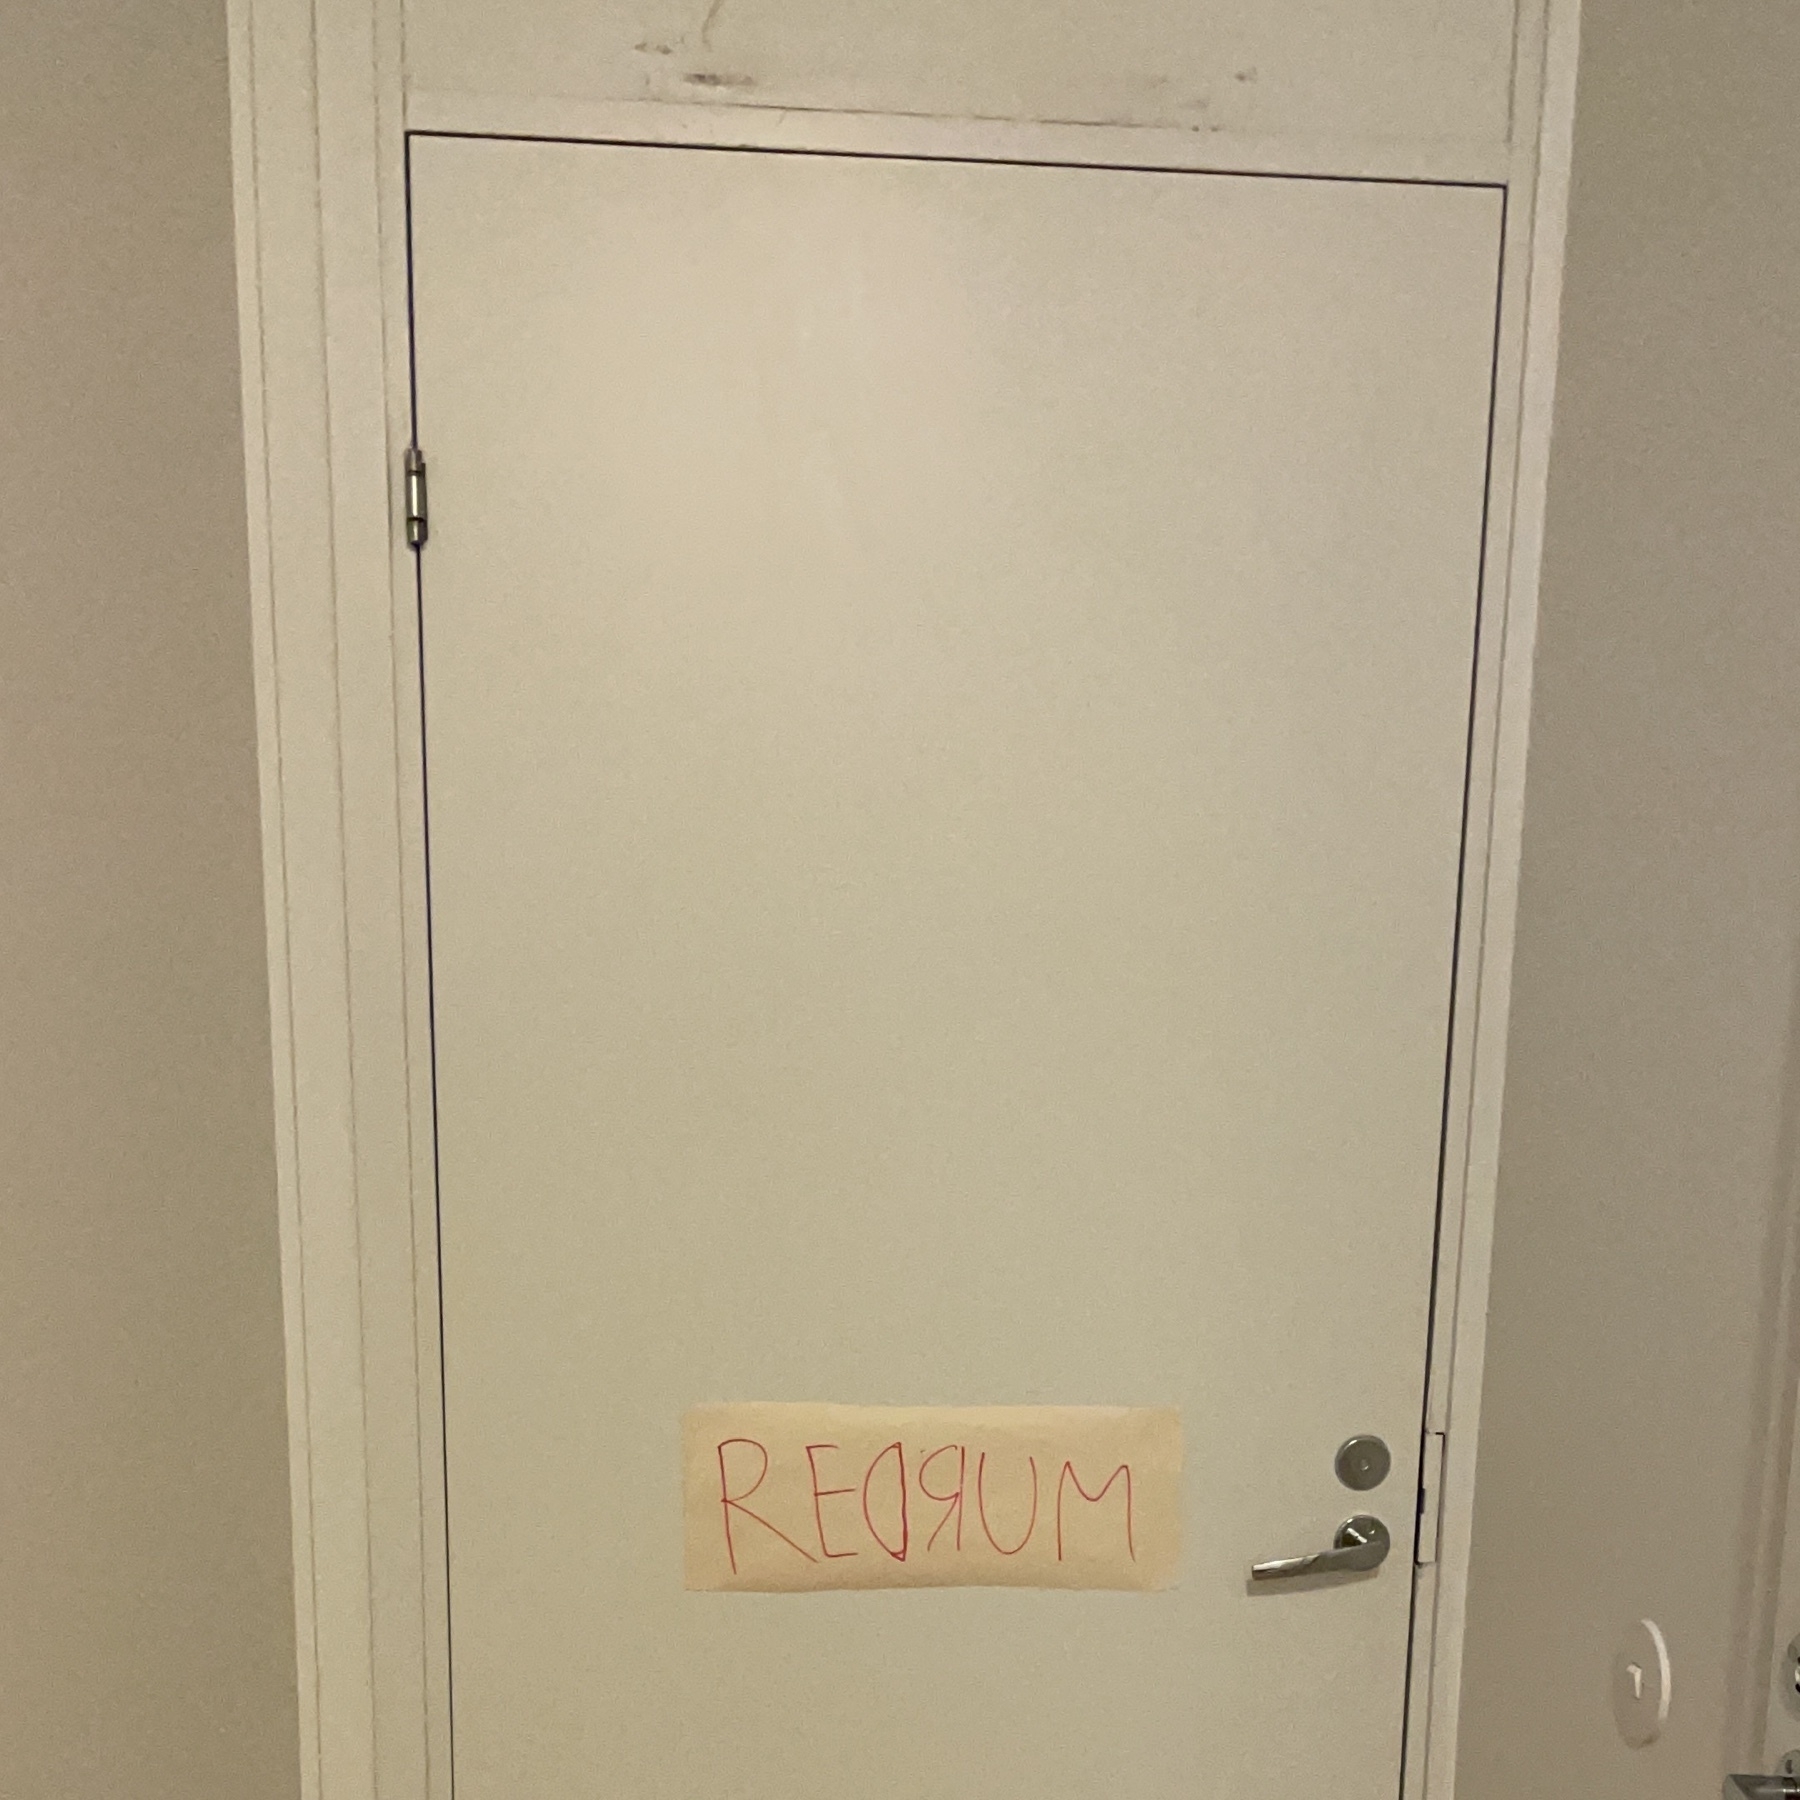 white door with a note in red "redrum"